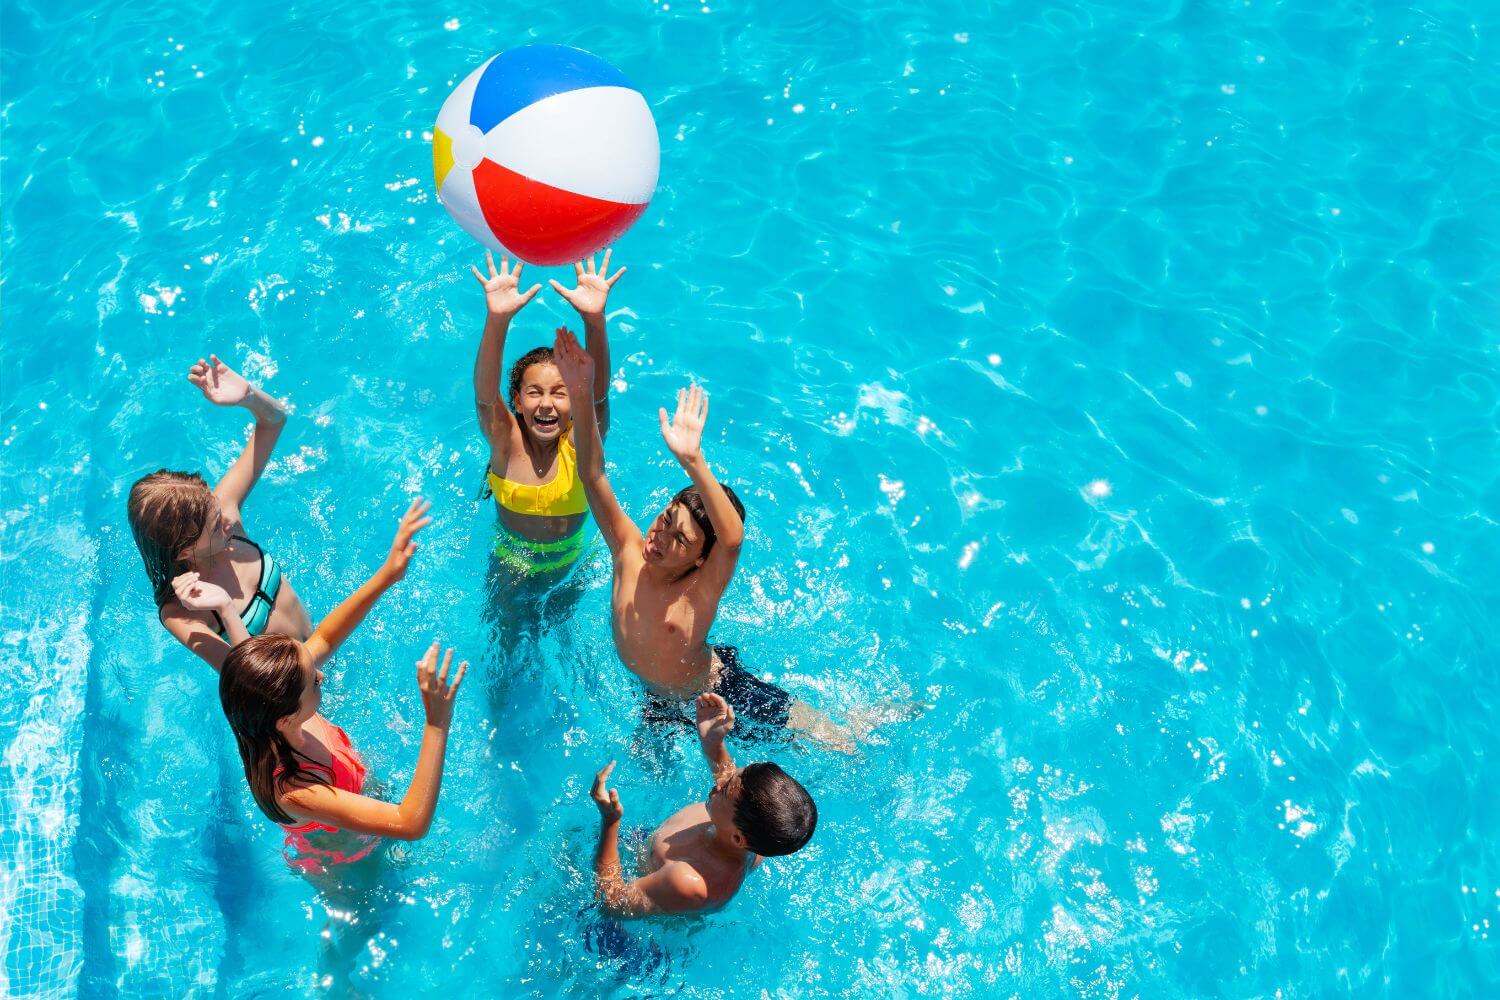 5 kids in a swimming pool jumping up to toss a beach ball